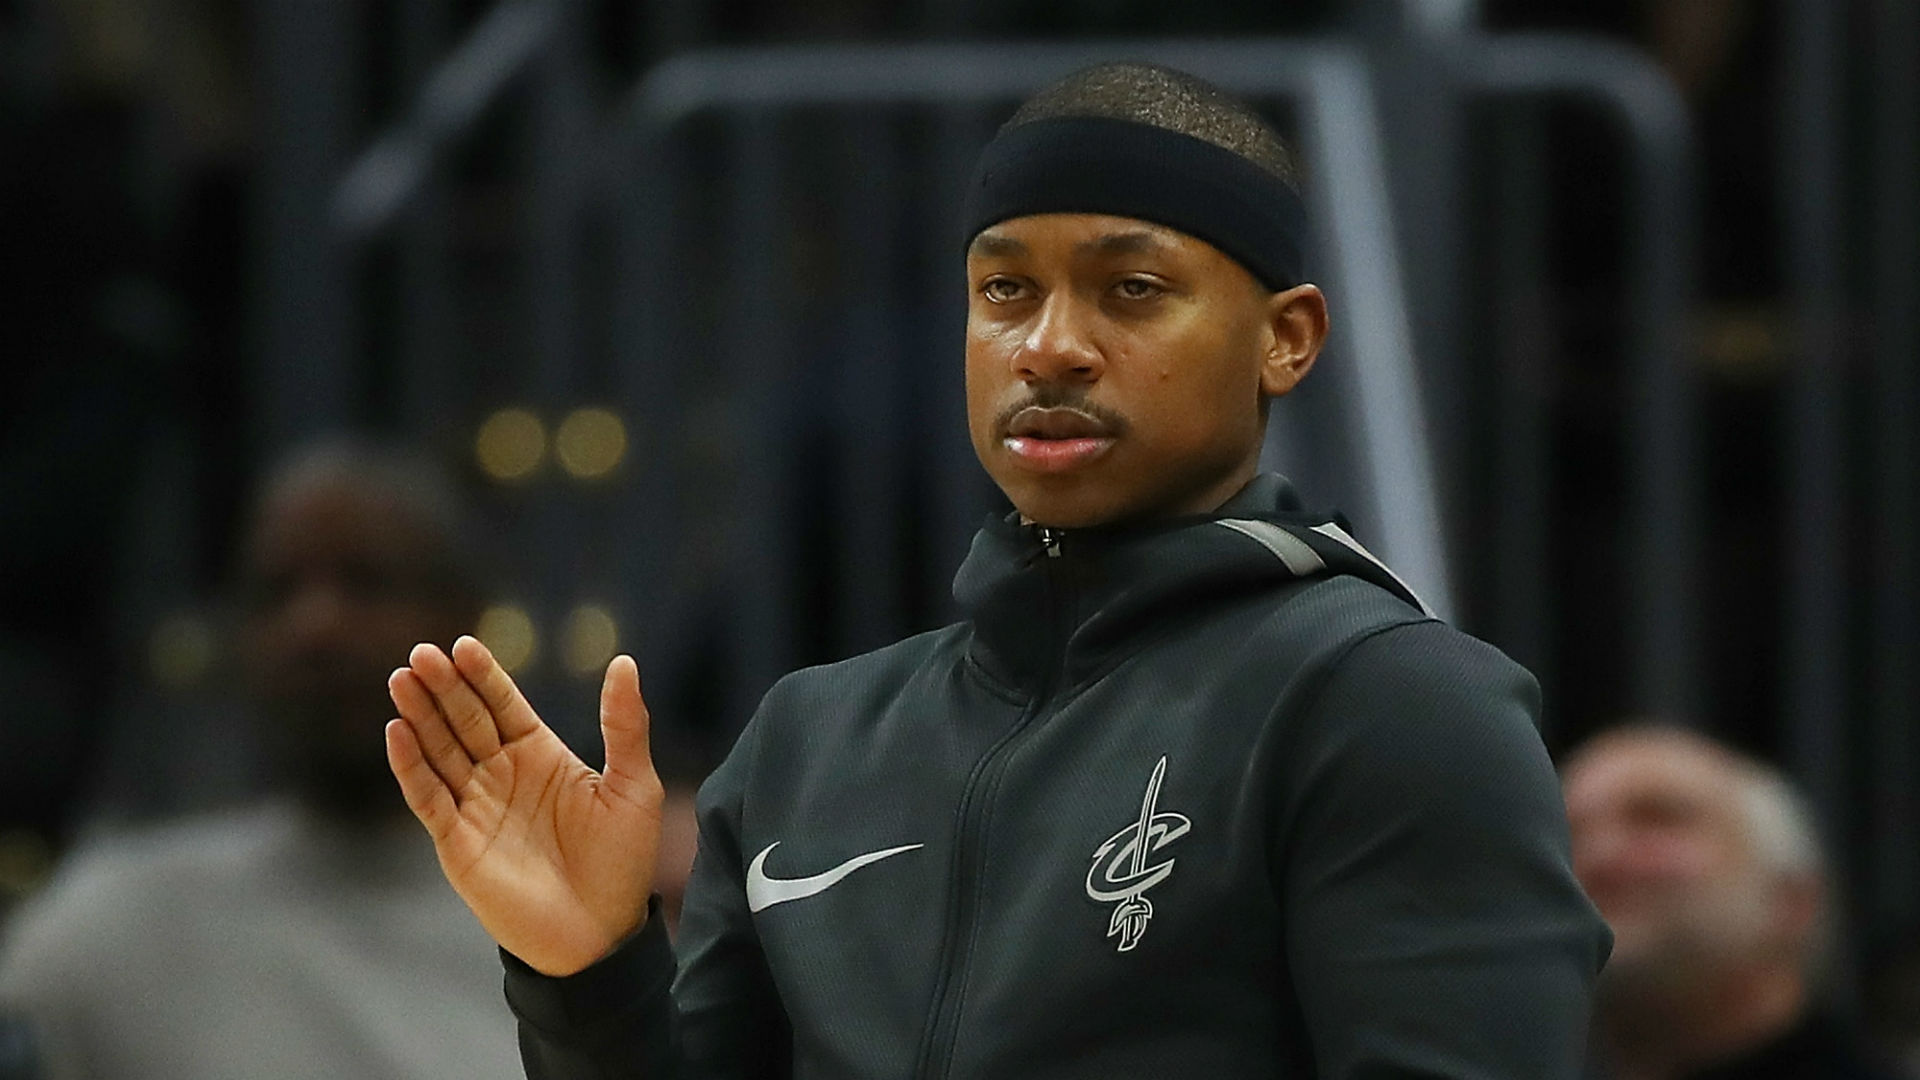 Isaiah Thomas' performance Tuesday 'the last thing' LeBron James will think about